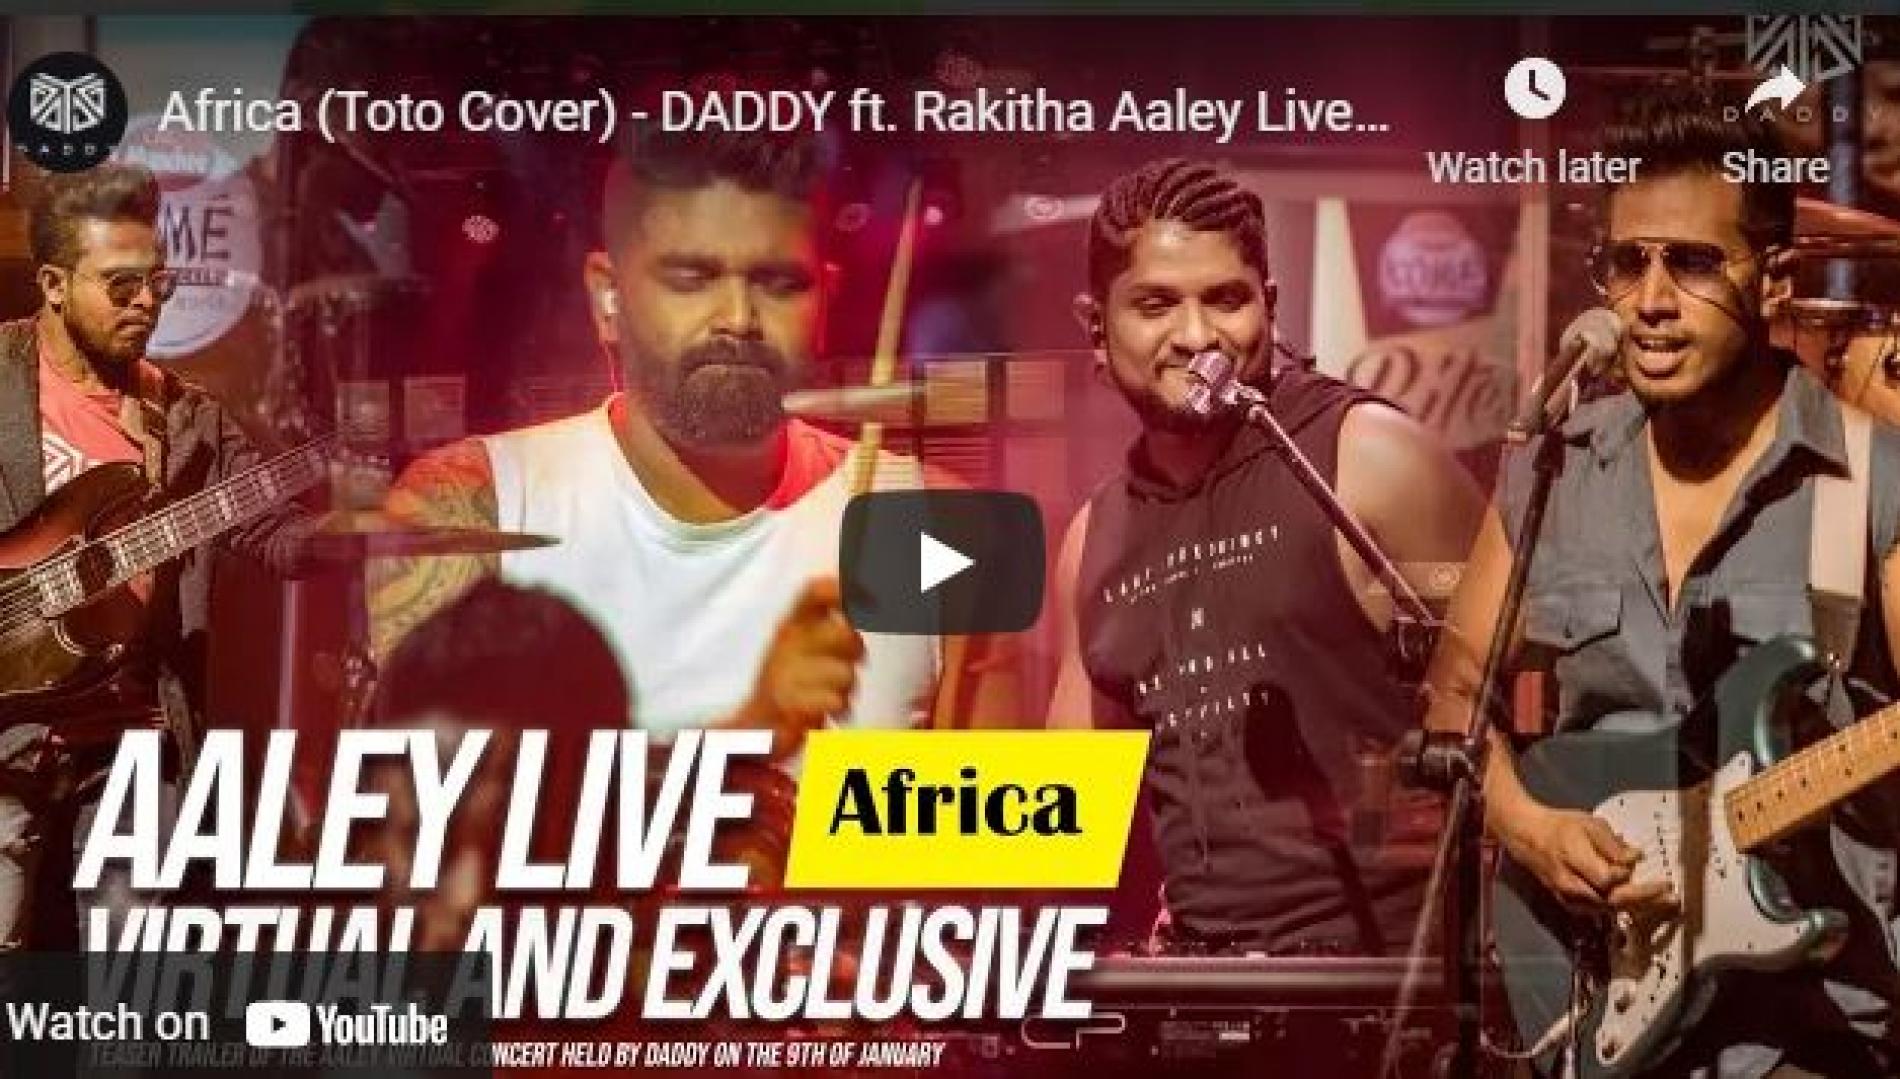 New Music : Africa (Toto Cover) – Daddy Ft Rakitha Aaley Live [Virtual and Exclusive]